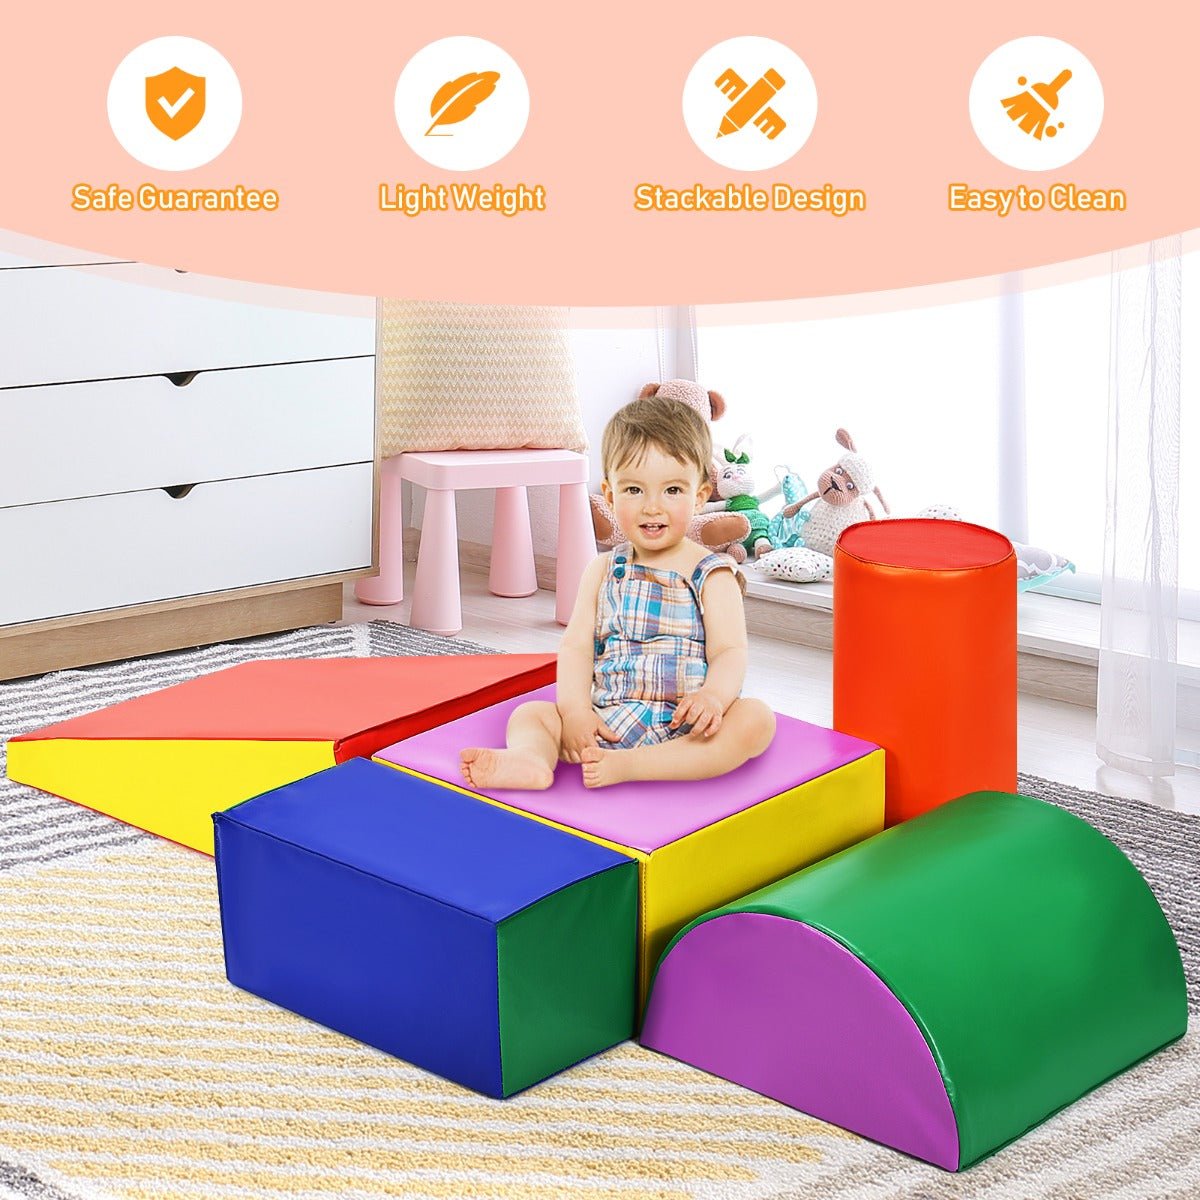 Toddler Foam Shapes Playset - Promotes Physical Development and Fun